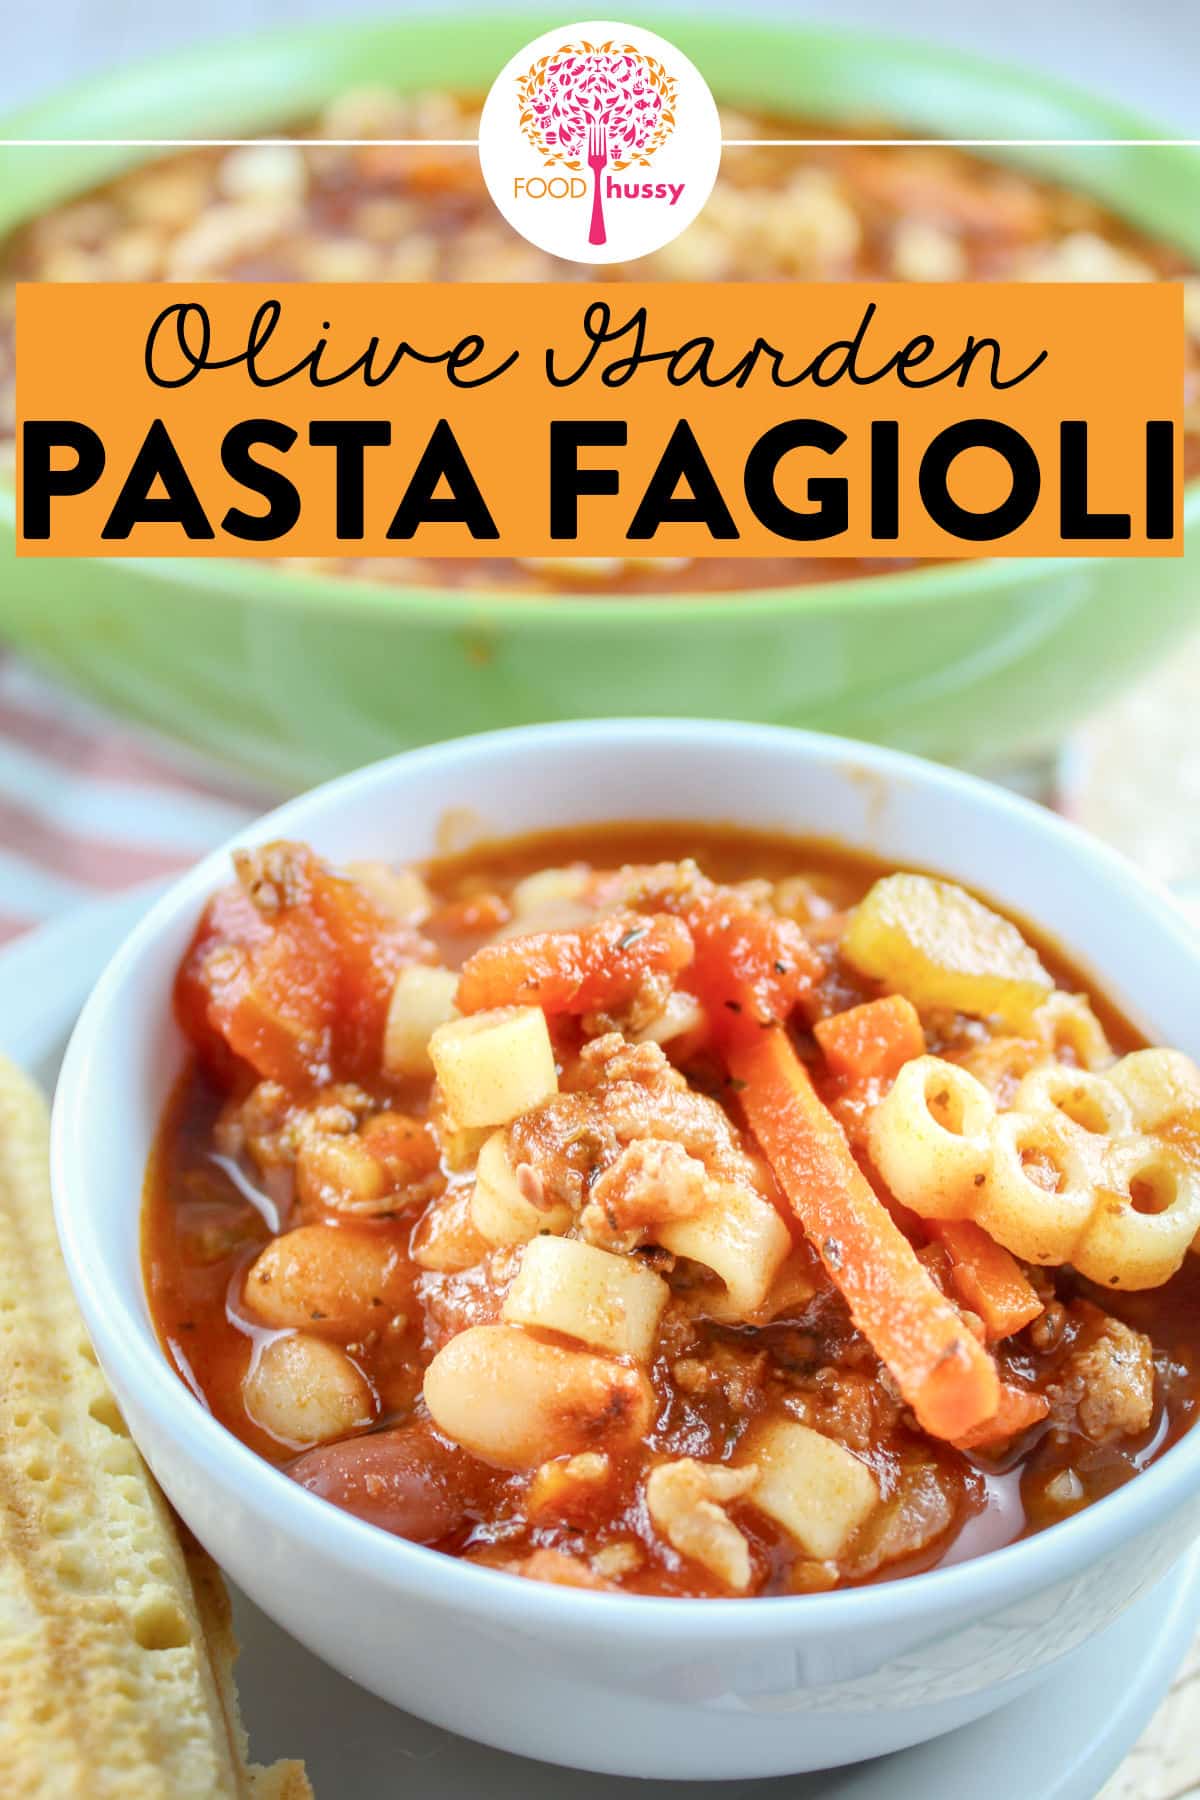 This Olive Garden Pasta Fagioli recipe will have you feeling like you just walked into the garden of olives! It's like an Italian version of chili with sausage, carrots, onion, celery, tomatoes, beans and so much more! It's a perfect copycat recipe and tastes exactly like the real thing. It's my favorite soup to make! via @foodhussy